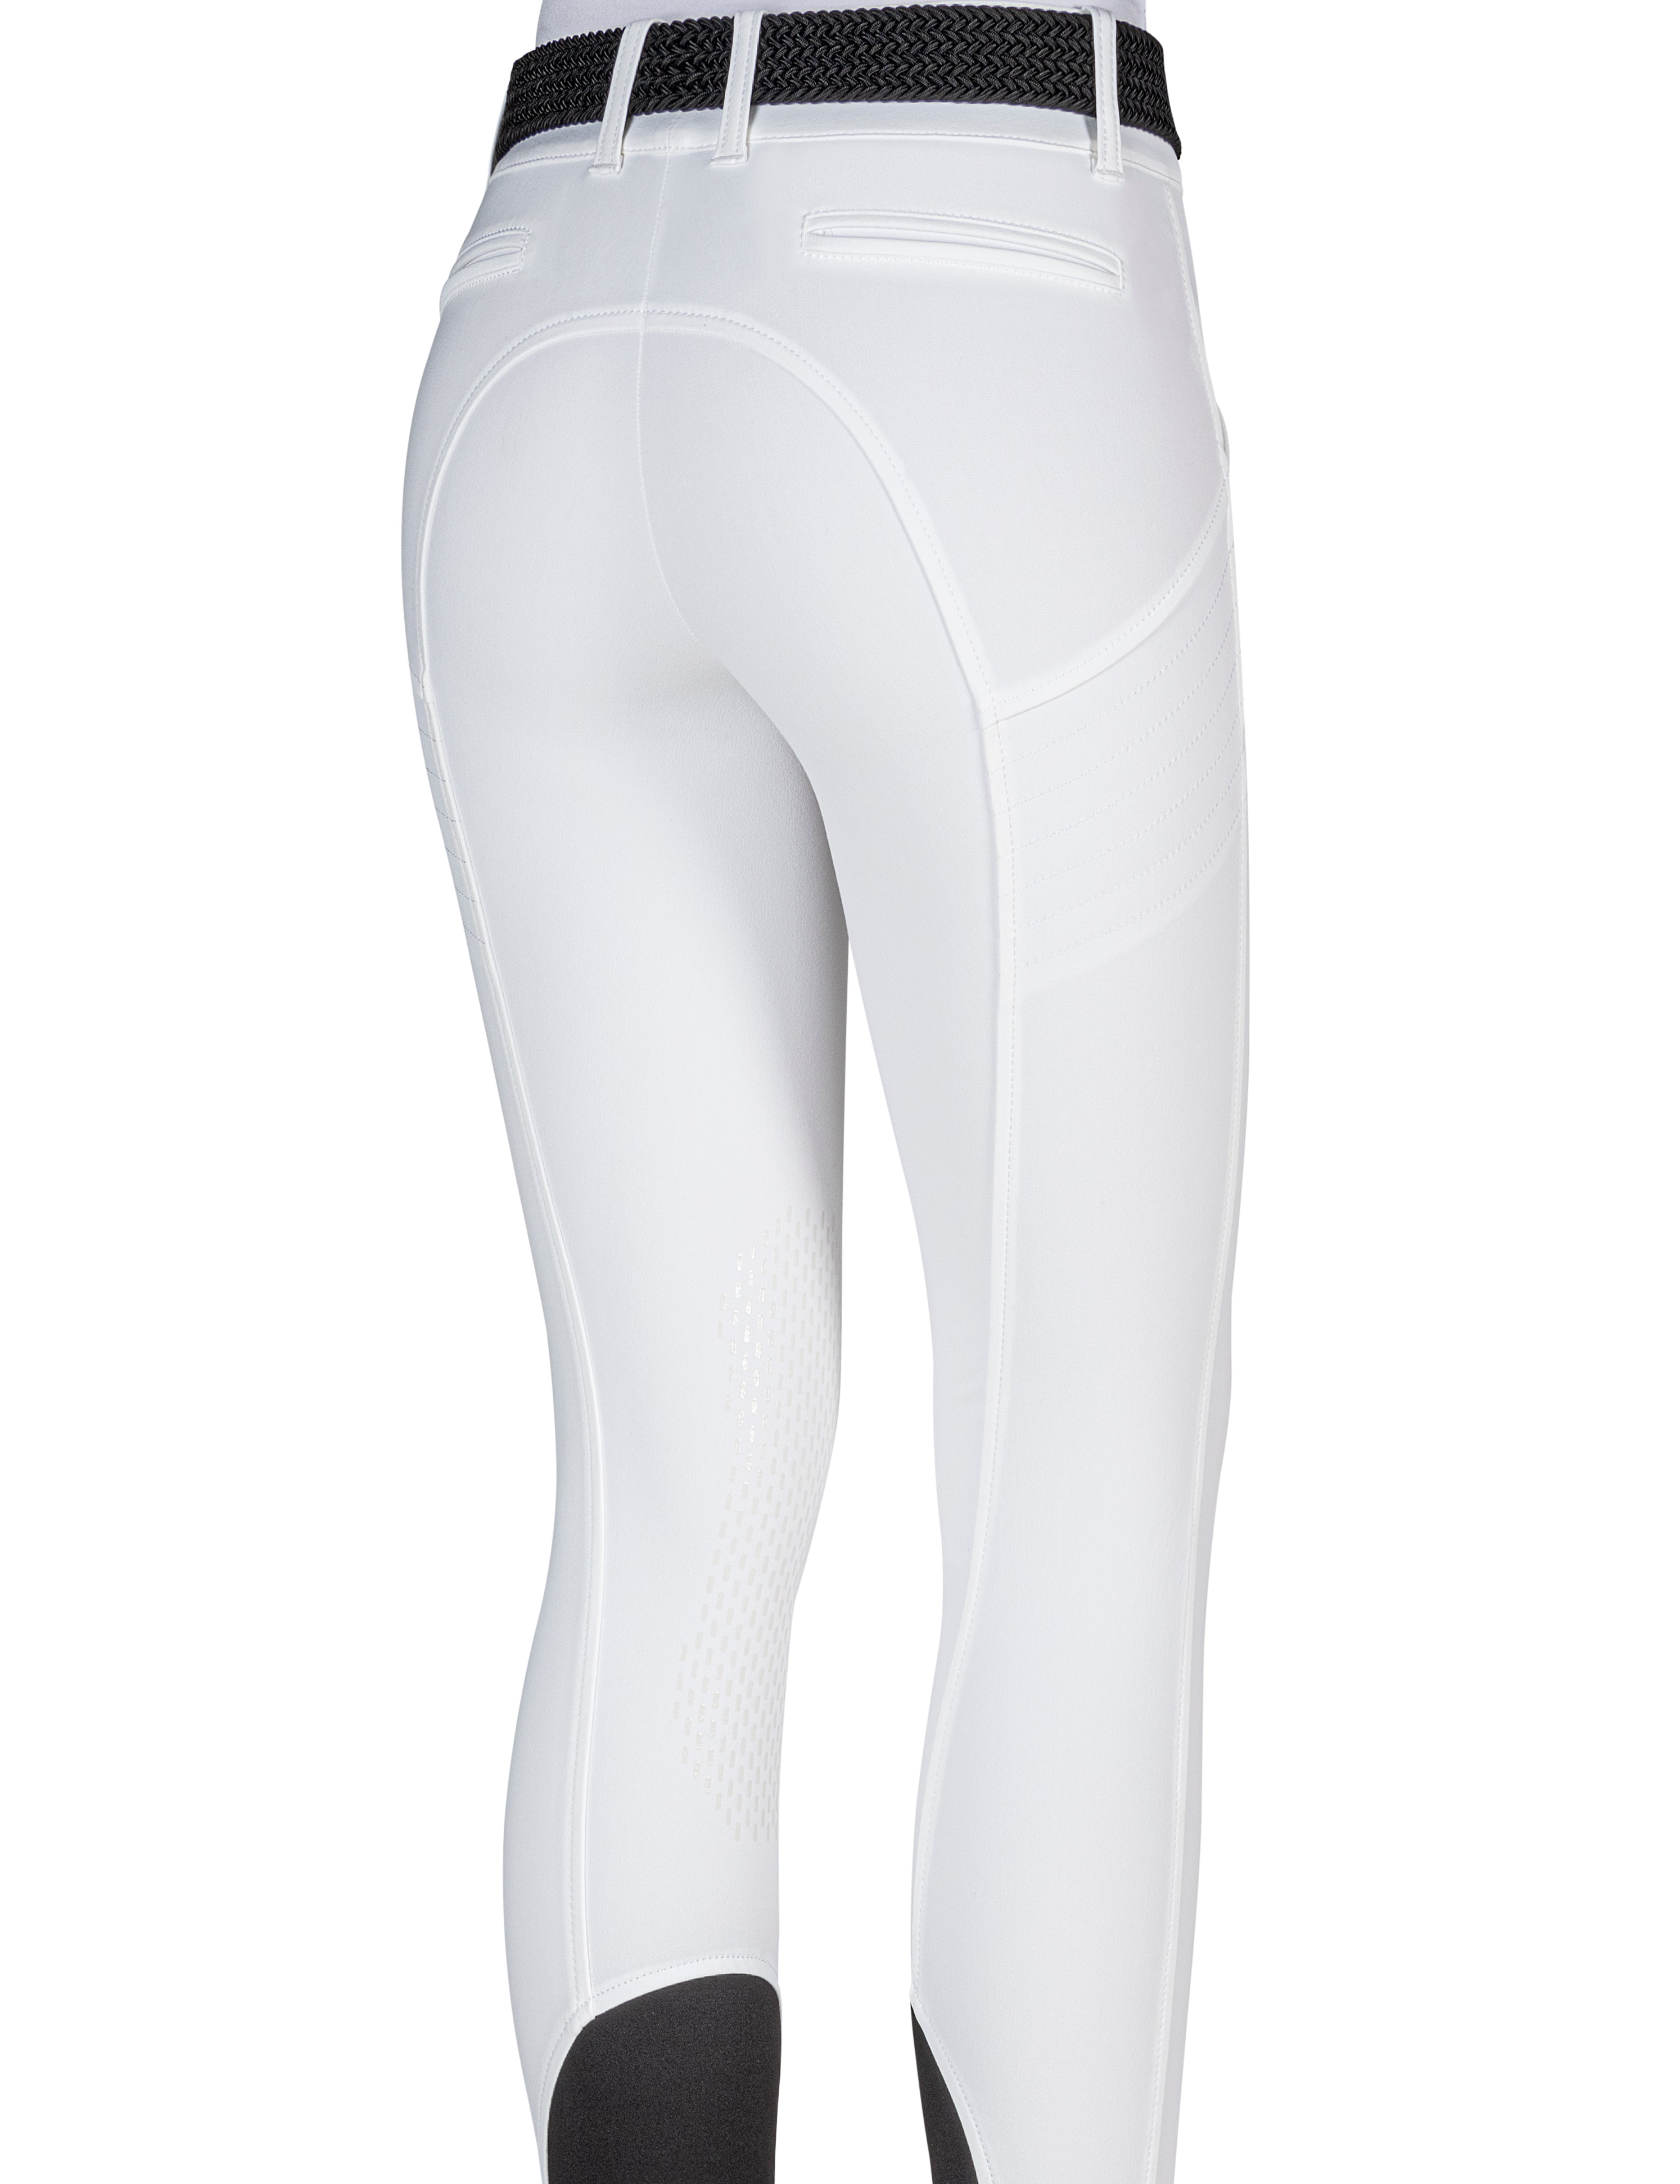 Equiline X-Shape Breeches